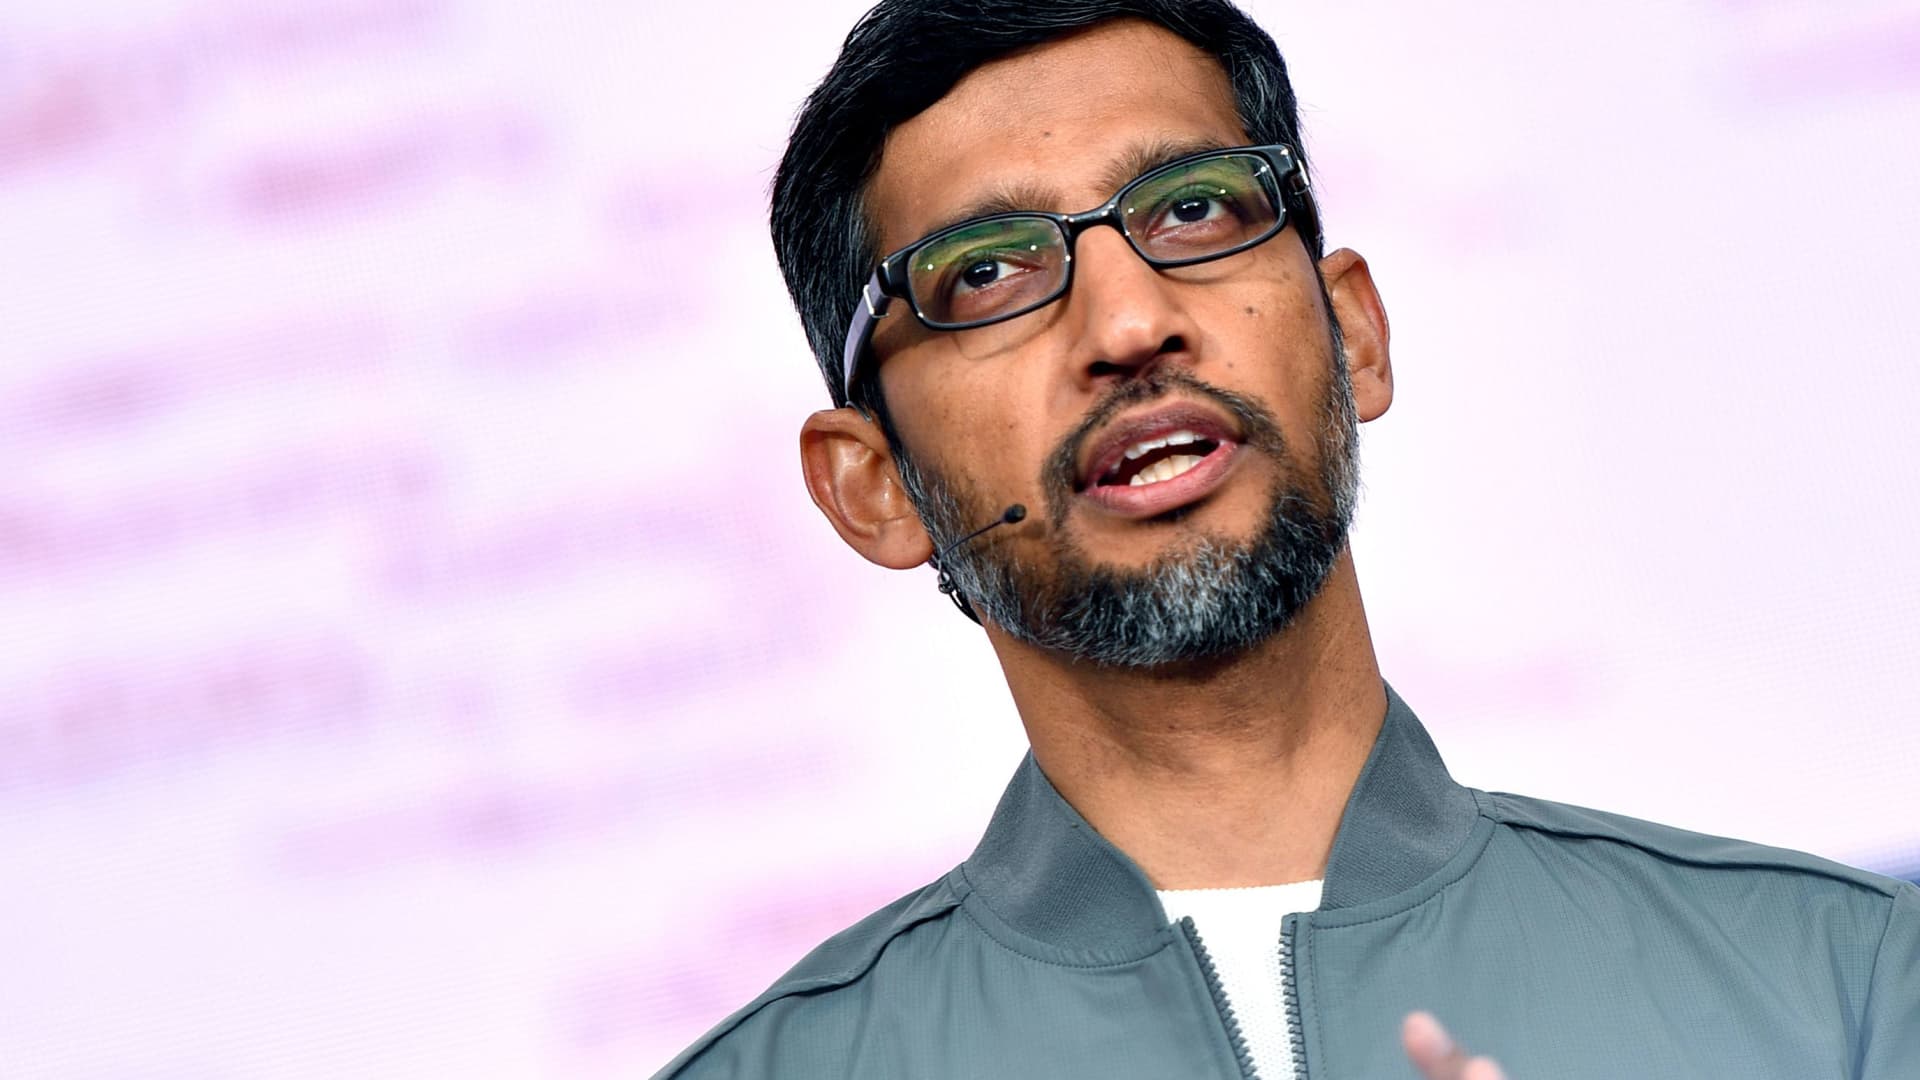 Alphabet is set to report Q2 earnings after the bell